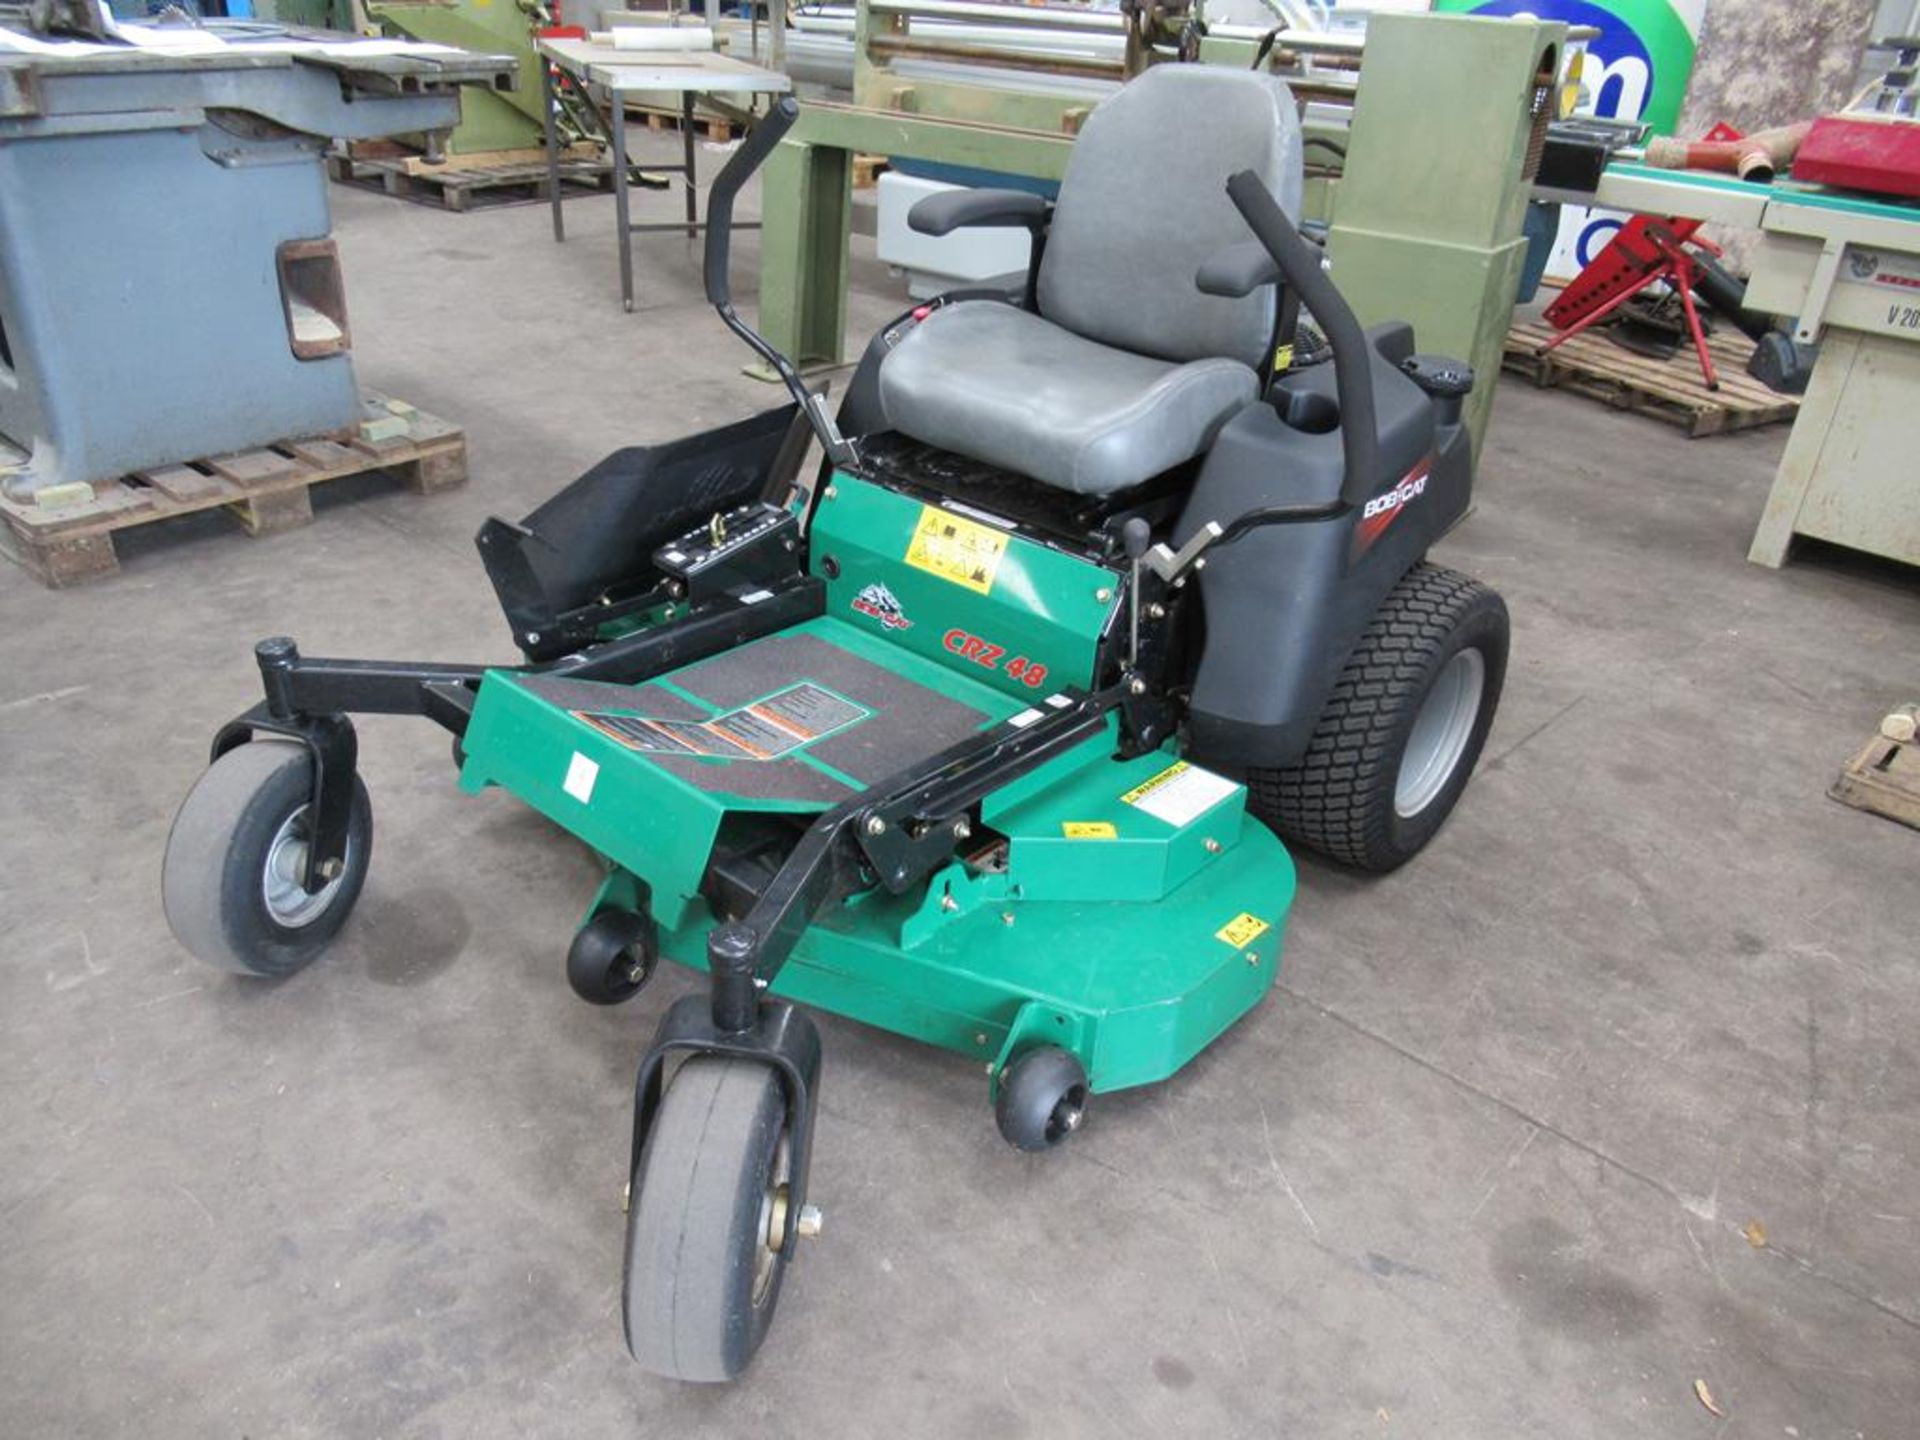 Bobcat CRZ 48" Zero turn ride on mower including Mulch Kit (12hrs). Please Note This Lot is Buyer to